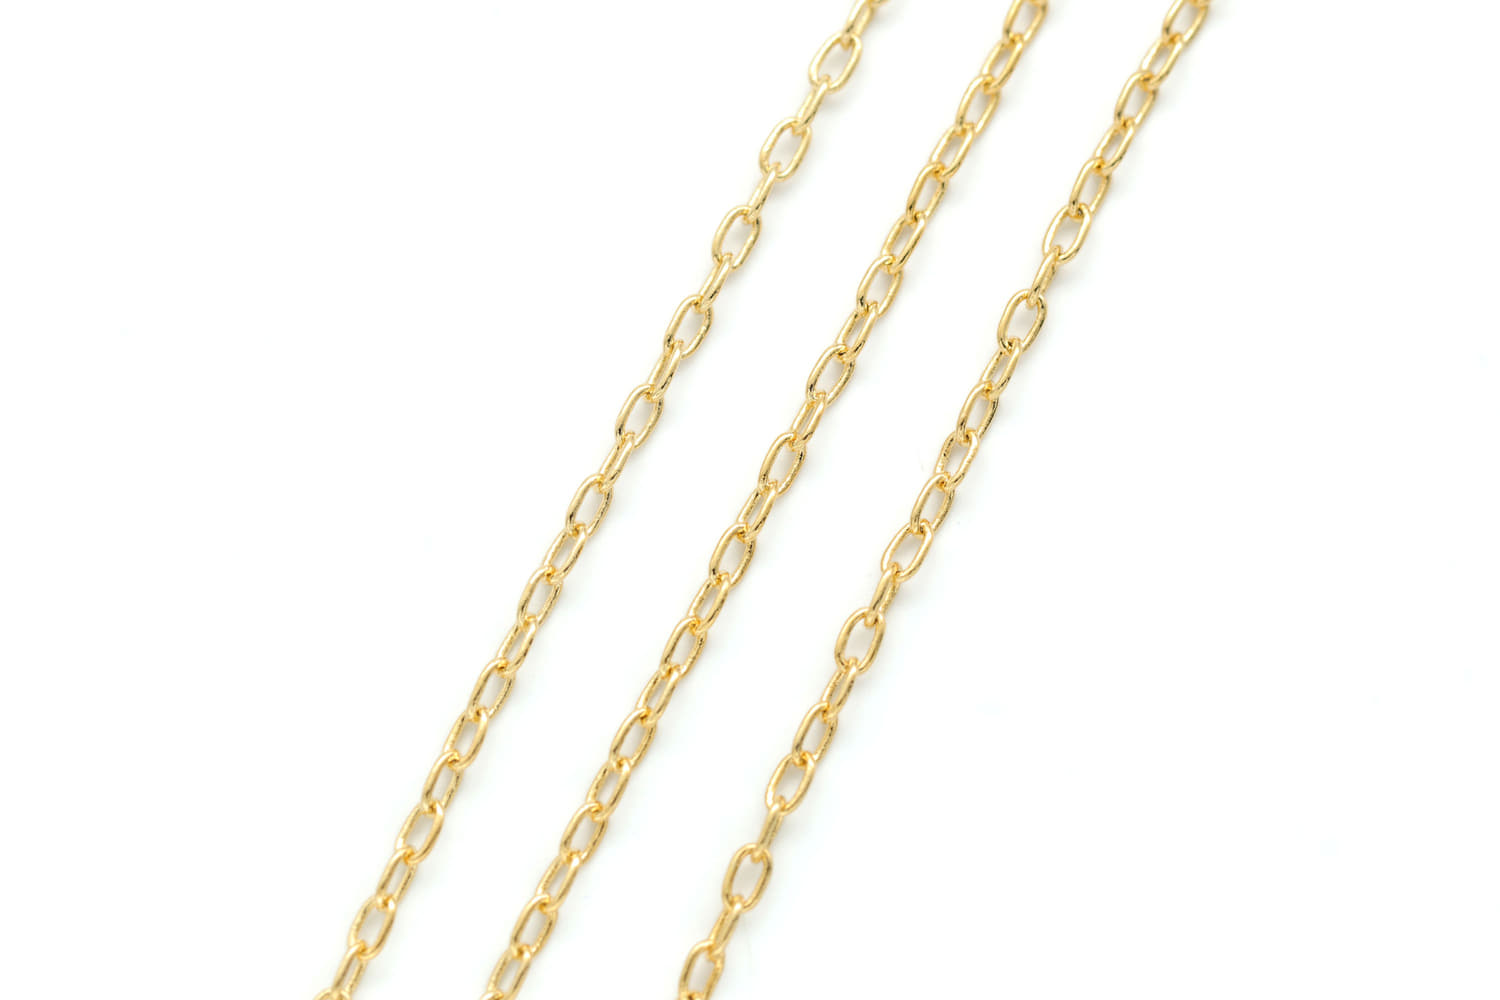 [CJ45-06]Oval Link Chain, 1m, Outer 4x3mm, 16K gold plated copper brass, Nickel free, Anklet / Bracelet / Necklace chain, Extension chain